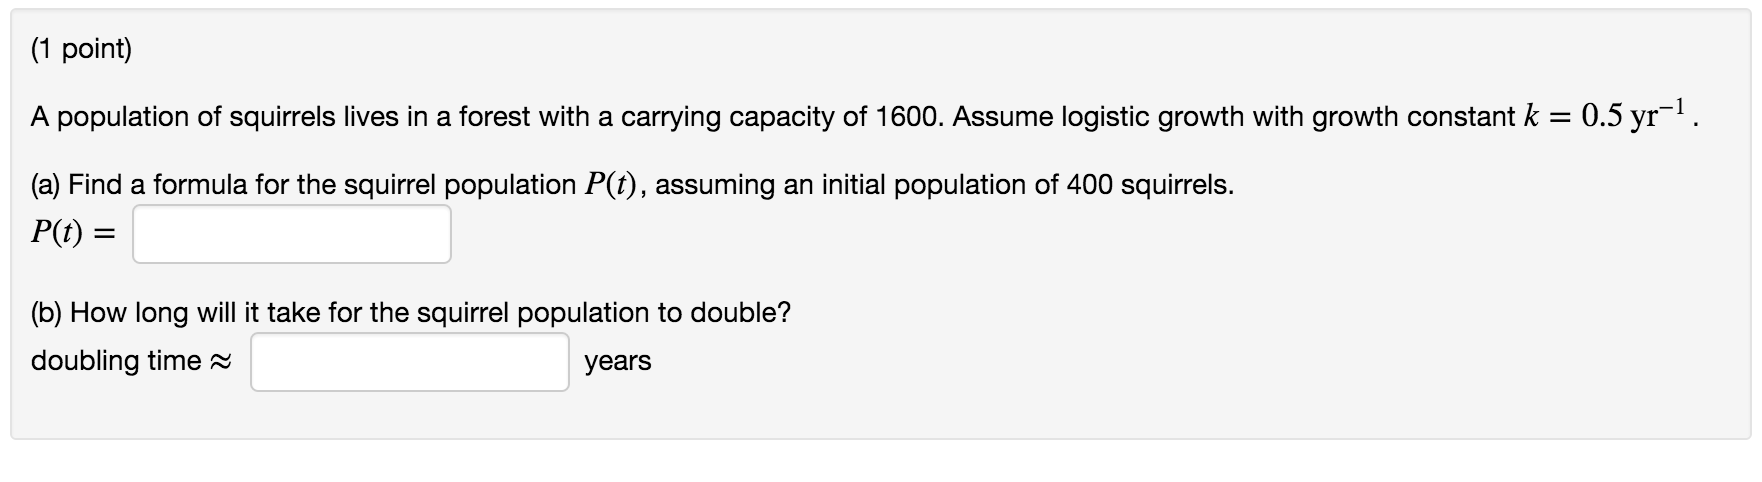 What is a carrying capacity formula?